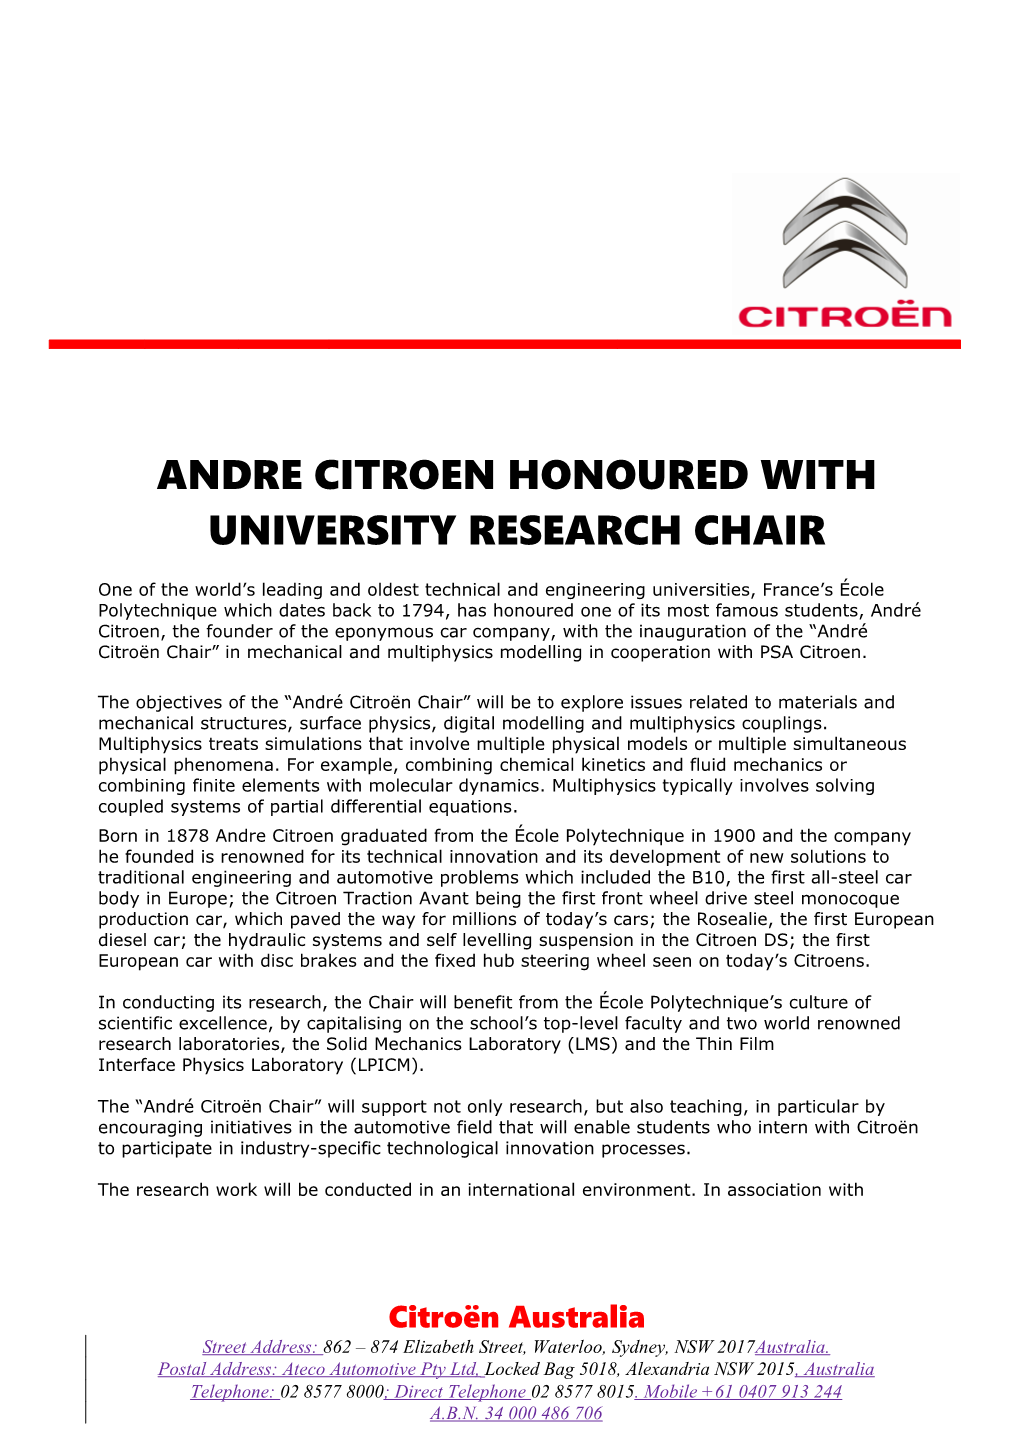 Andre Citroen Honoured with University Research Chair